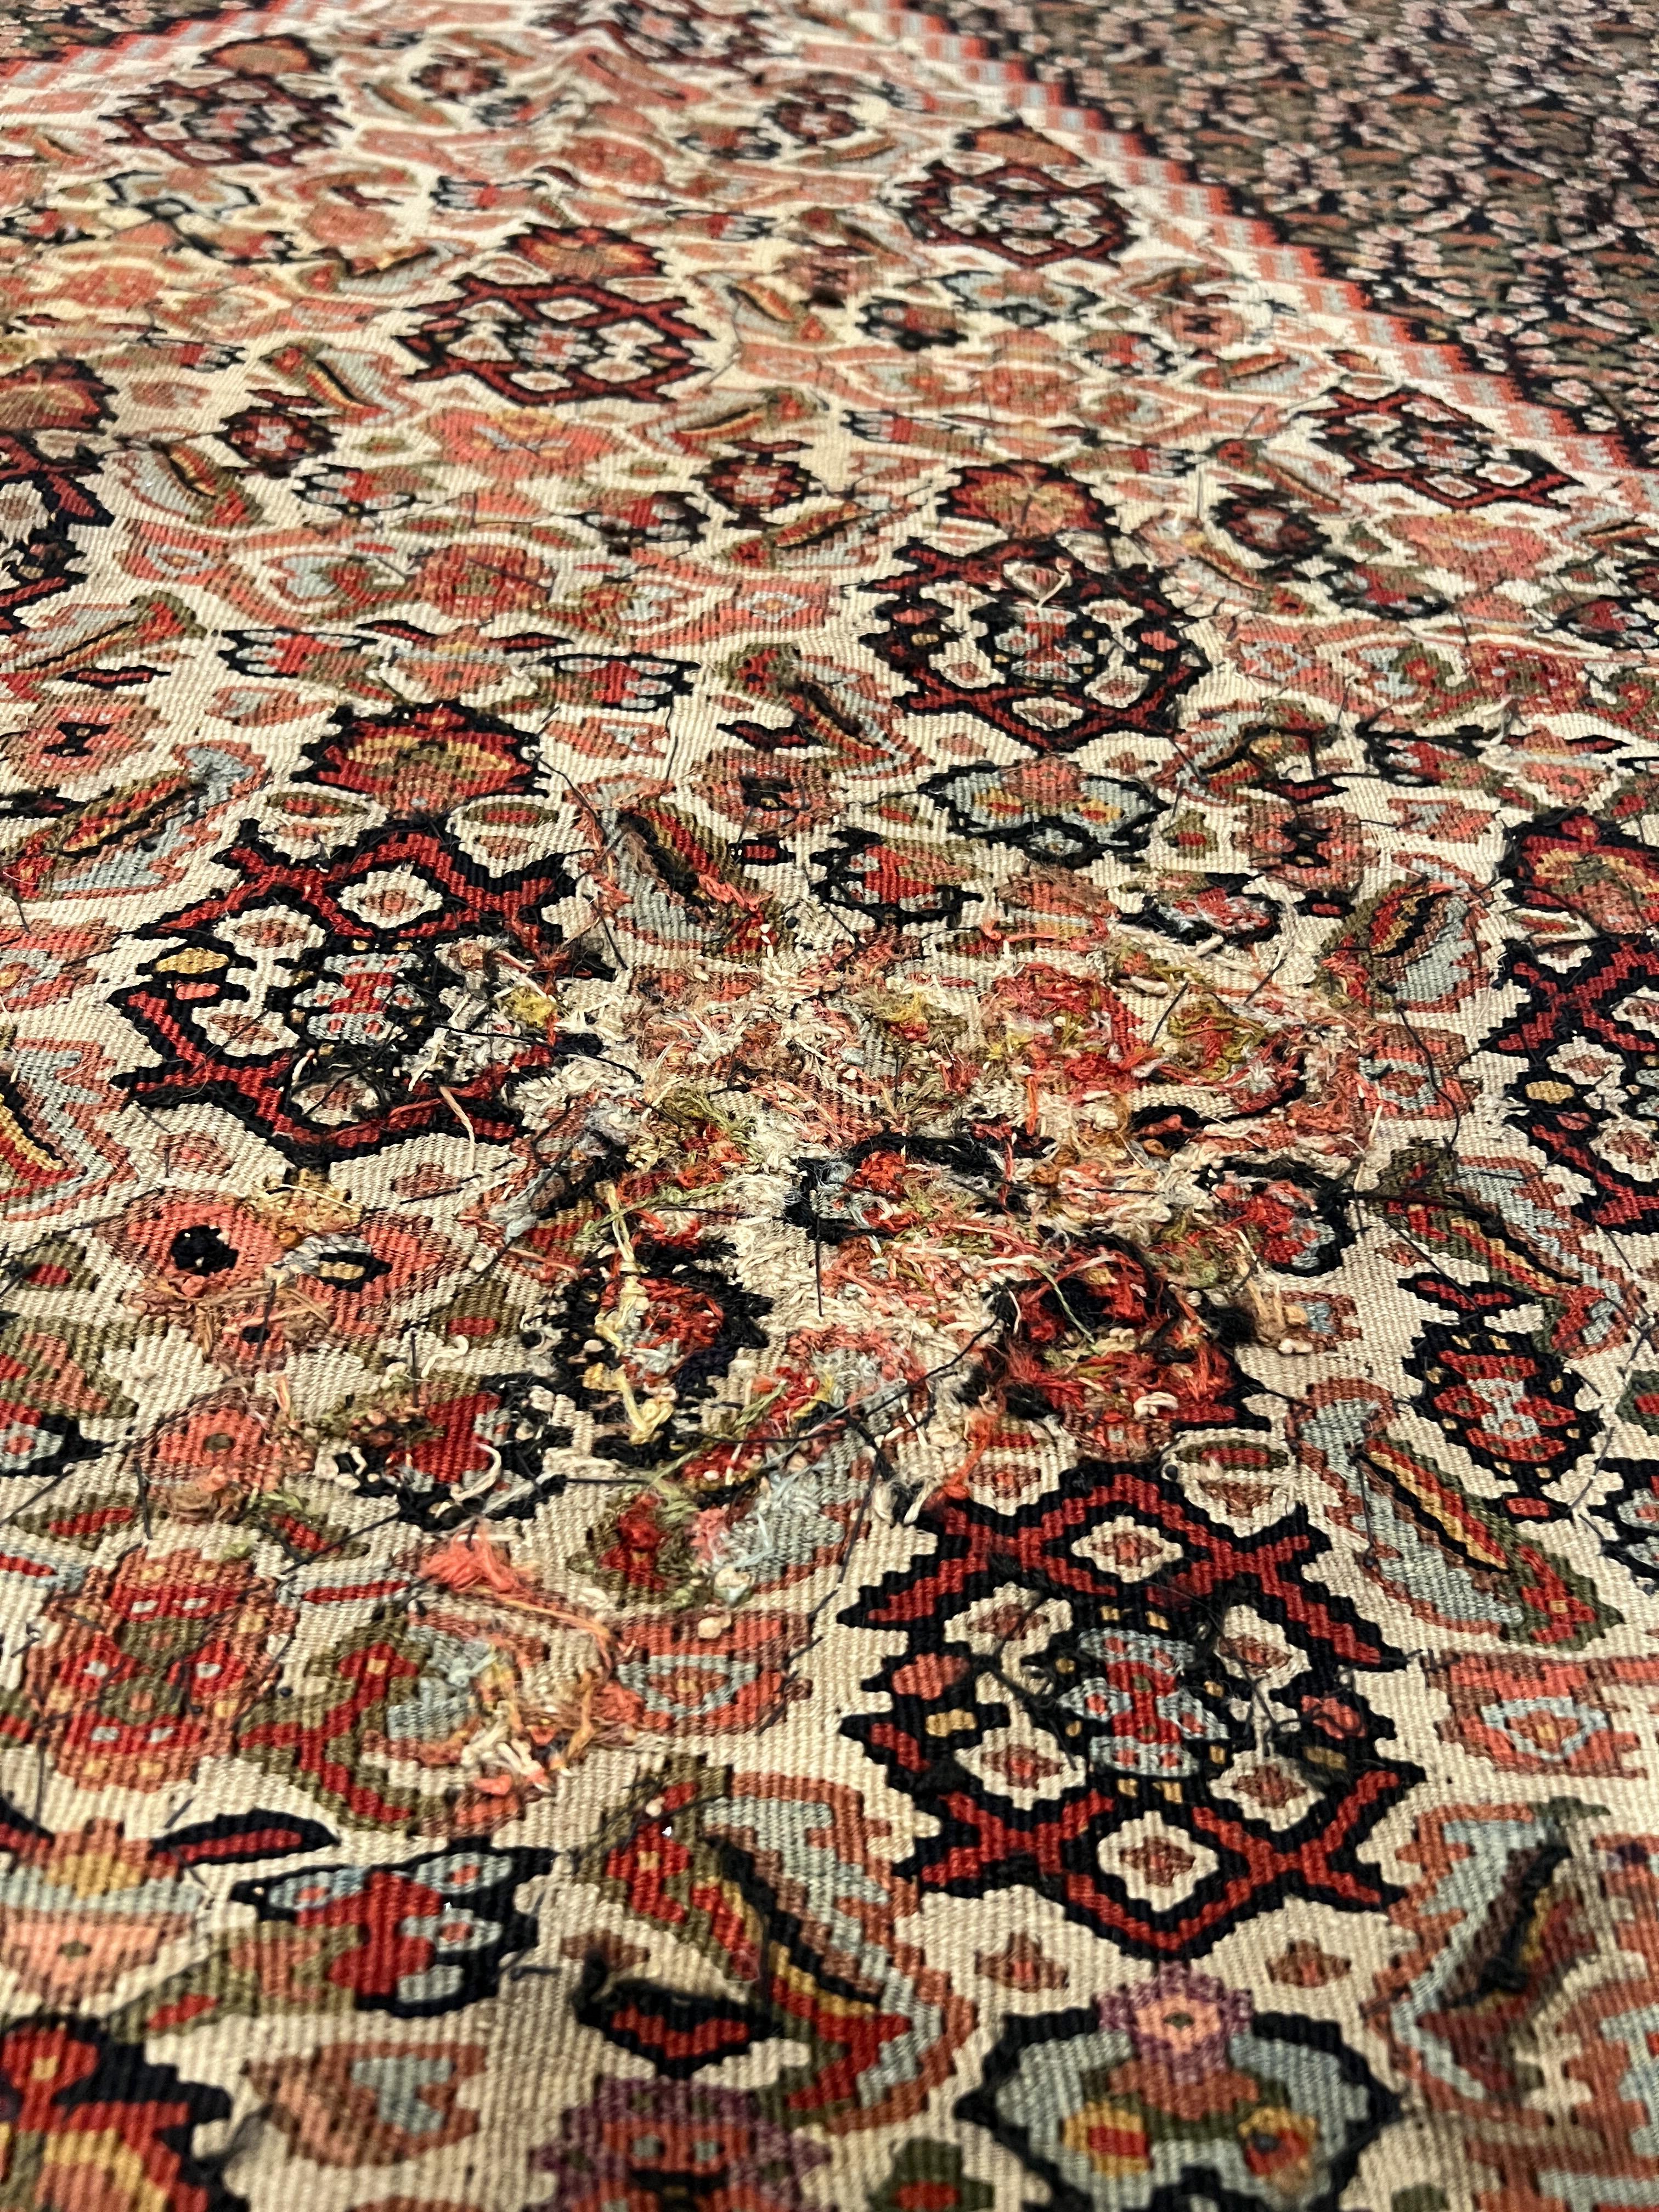 Hand-Knotted Senneh Kilim Late 19th C. Wool Rug For Sale